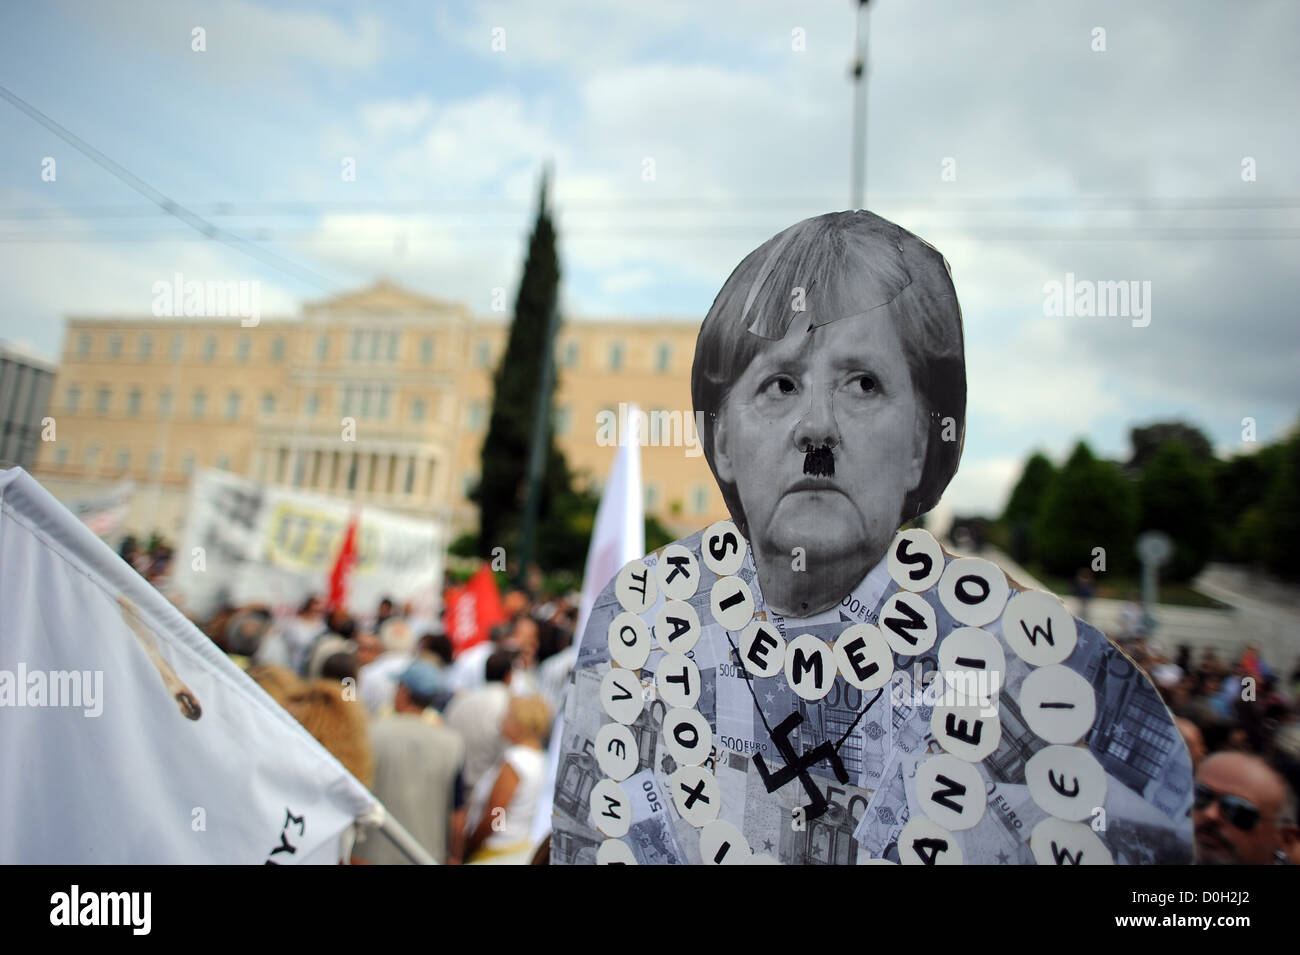 Anti-Merkel banner during a anti-austerity protest in Athens' Syntagma square, in front of Greece's Parliament, in October 2012. Stock Photo